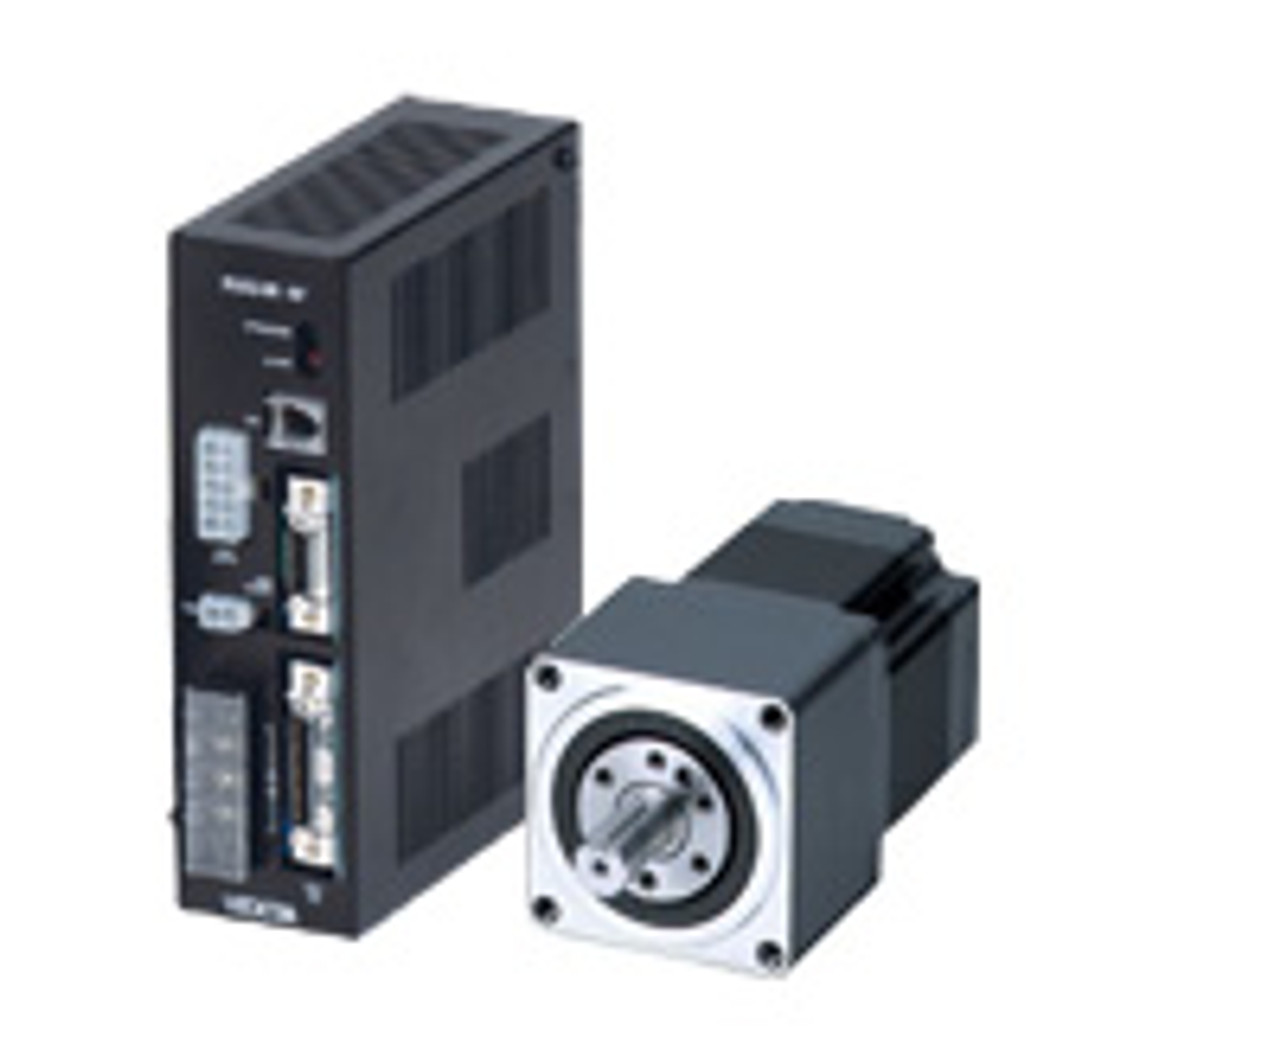 AS66MSP2-H100 - Product Image